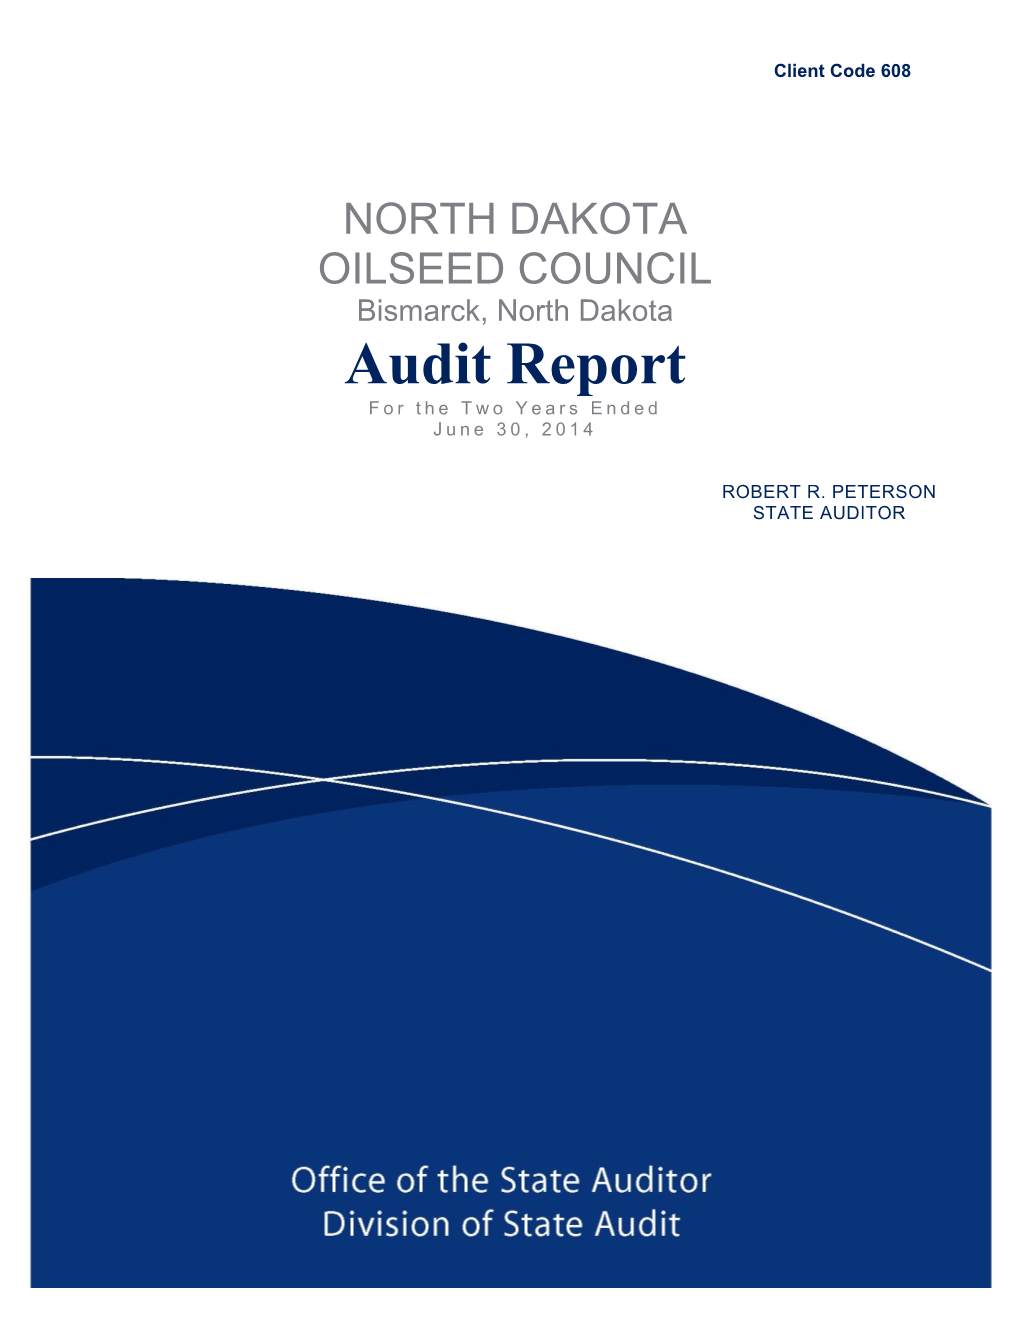 Audit Report for the Two Years Ended June 30, 2014